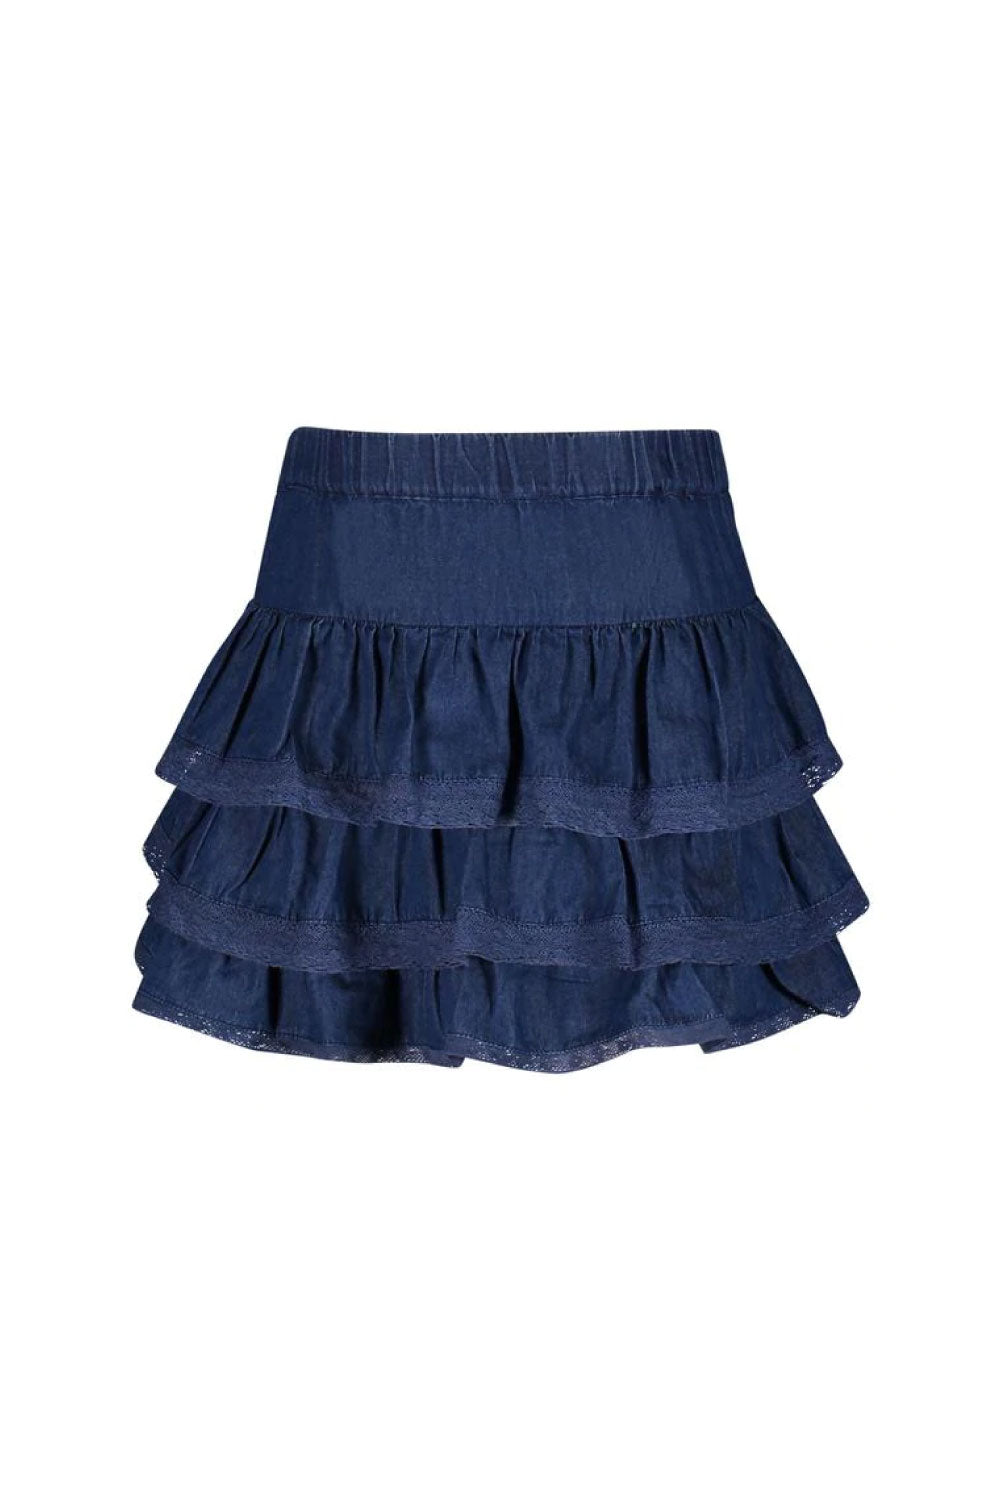 Image of the front of the Lacey Skirt in Denim.